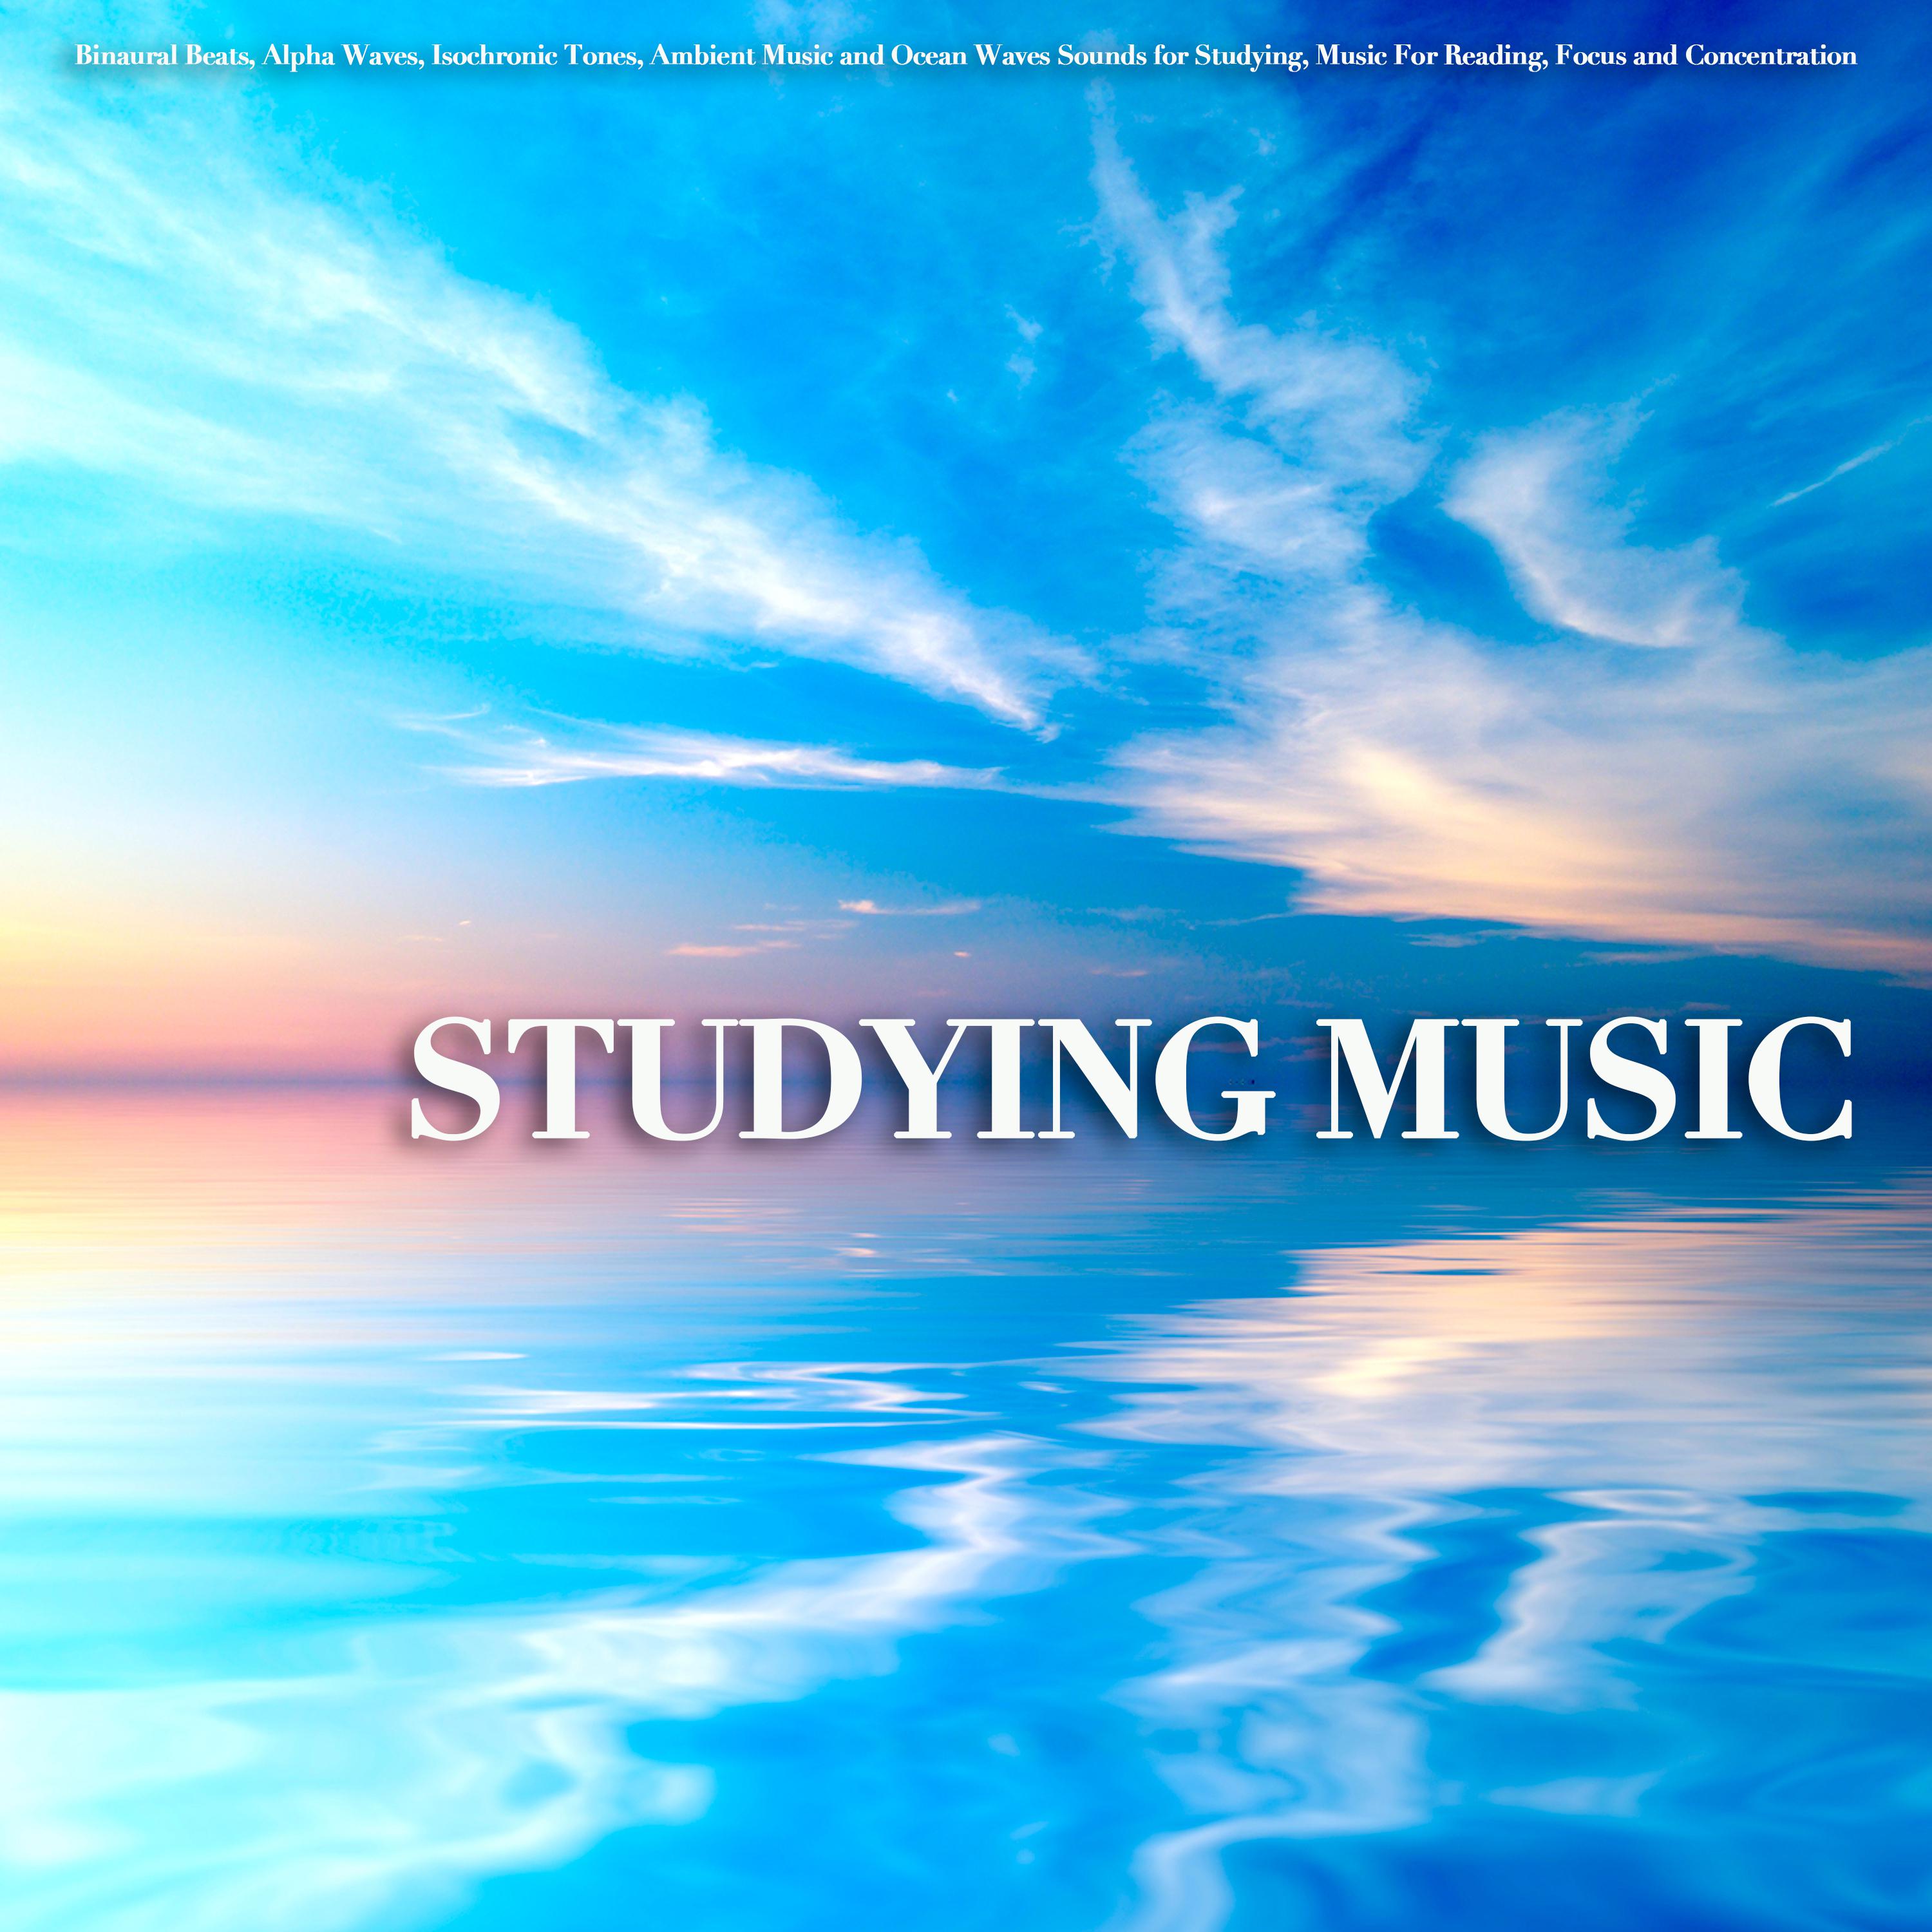 Studying Music: Binaural Beats, Alpha Waves, Isochronic Tones, Ambient Music and Ocean Waves Sounds for Studying, Music For Reading, Focus and Concentration